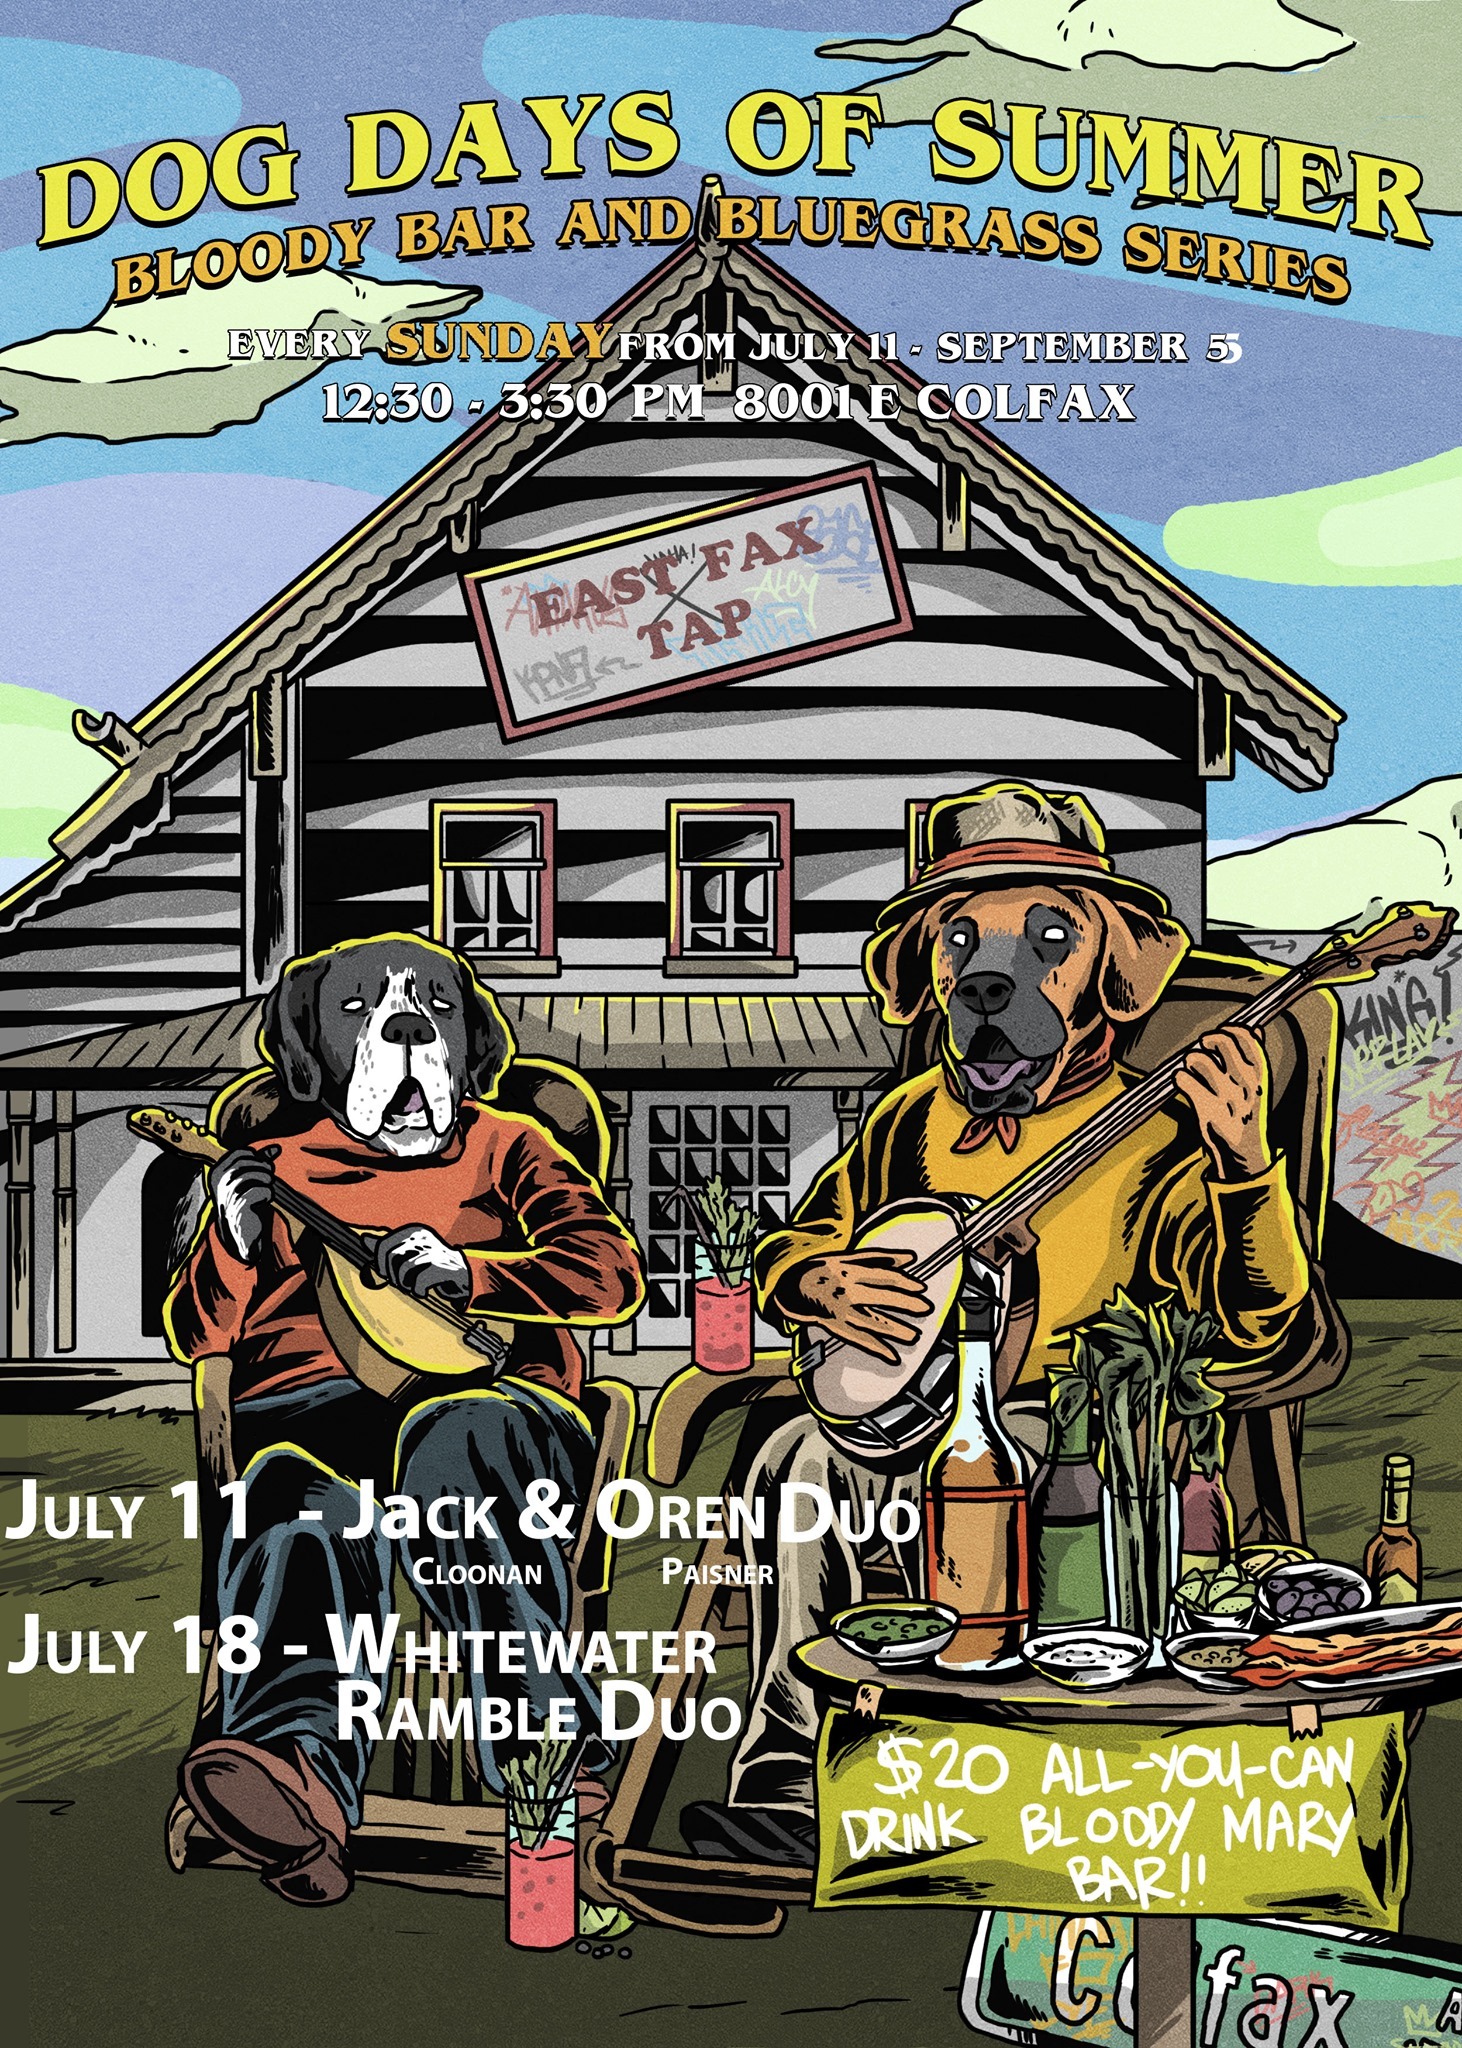 Dog Days Return with weekly bluegrass series at Eastfax Tap in East Denver